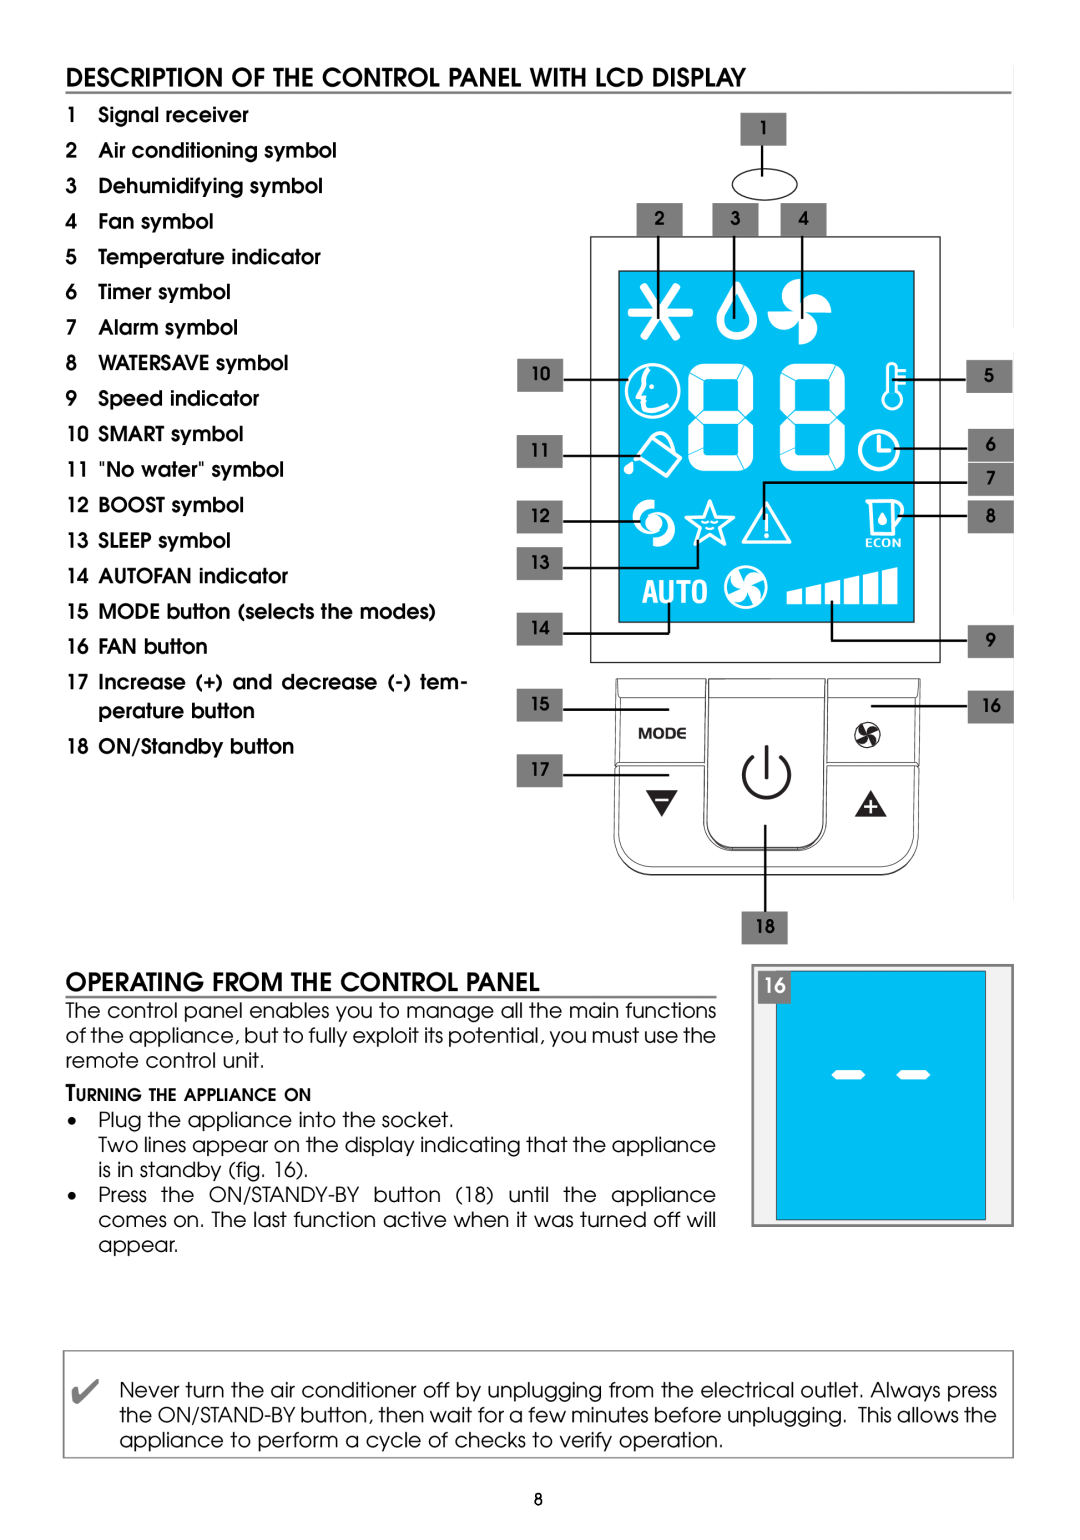 DeLonghi PAC W130E specifications Description Of The Control Panel With Lcd Display, Operating From The Control Panel 